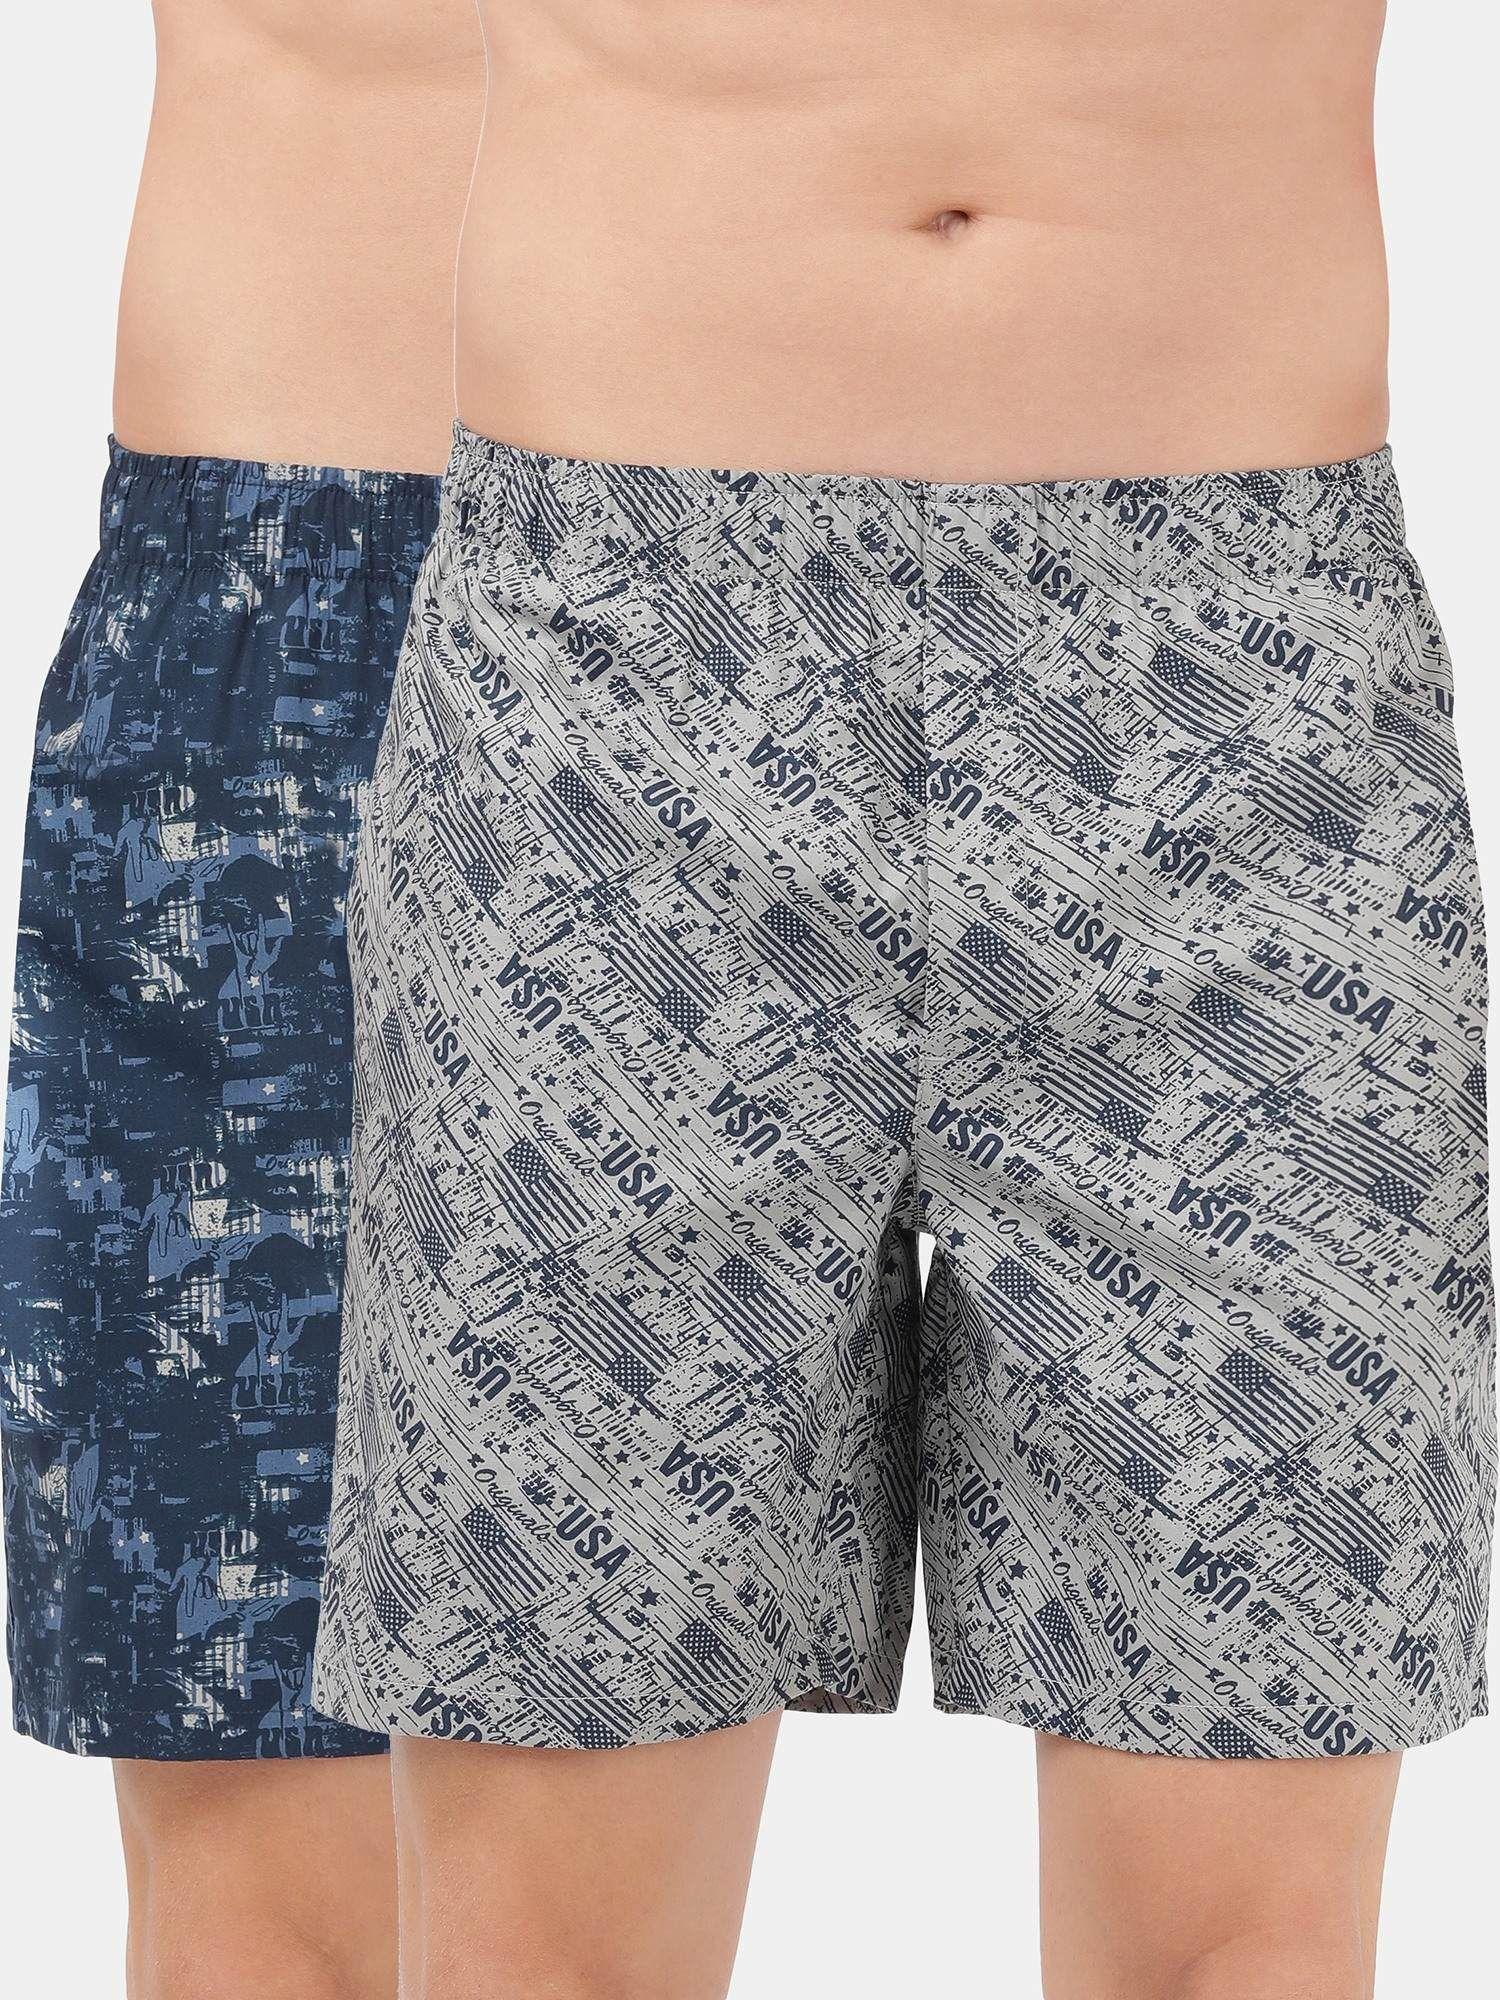 us57 mens cotton woven boxer shorts with side pocket - navy nickle (pack of 2)